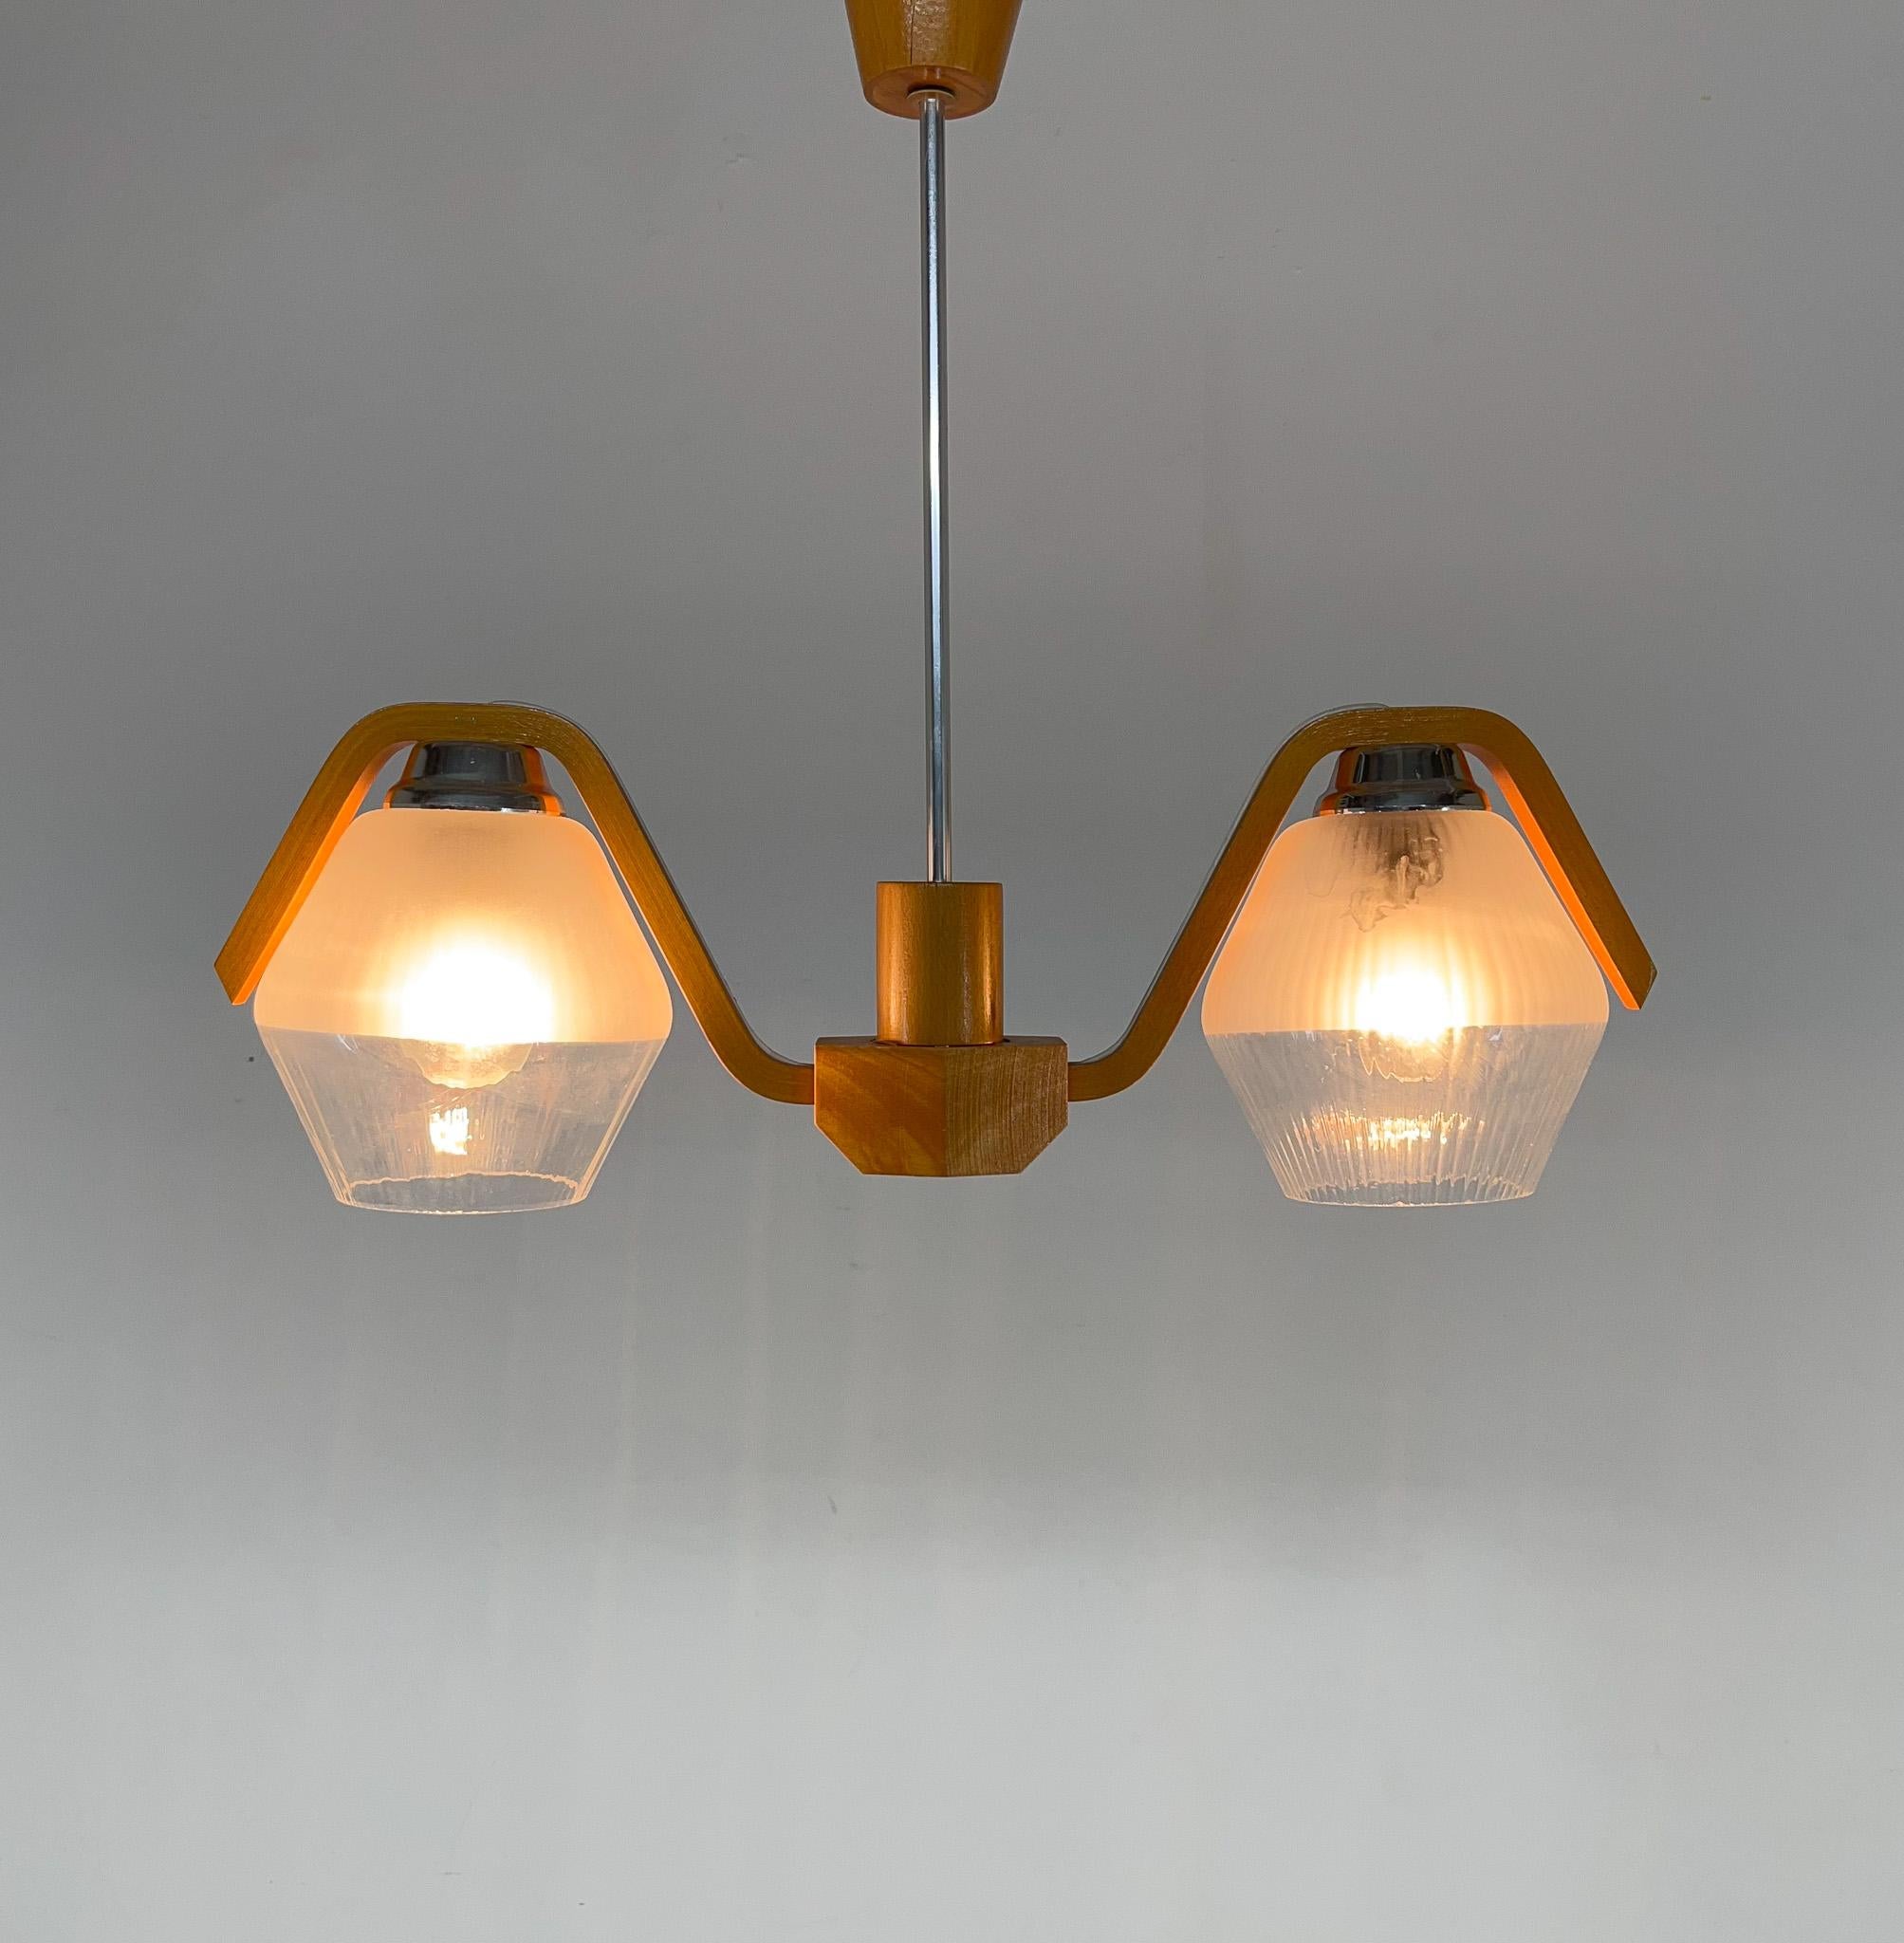 Wood and glass 2-arm chandelier made by Drevo Humpolec in former Czechoslovakia in the 1960's. Bulbs: 2 x E25-E27.